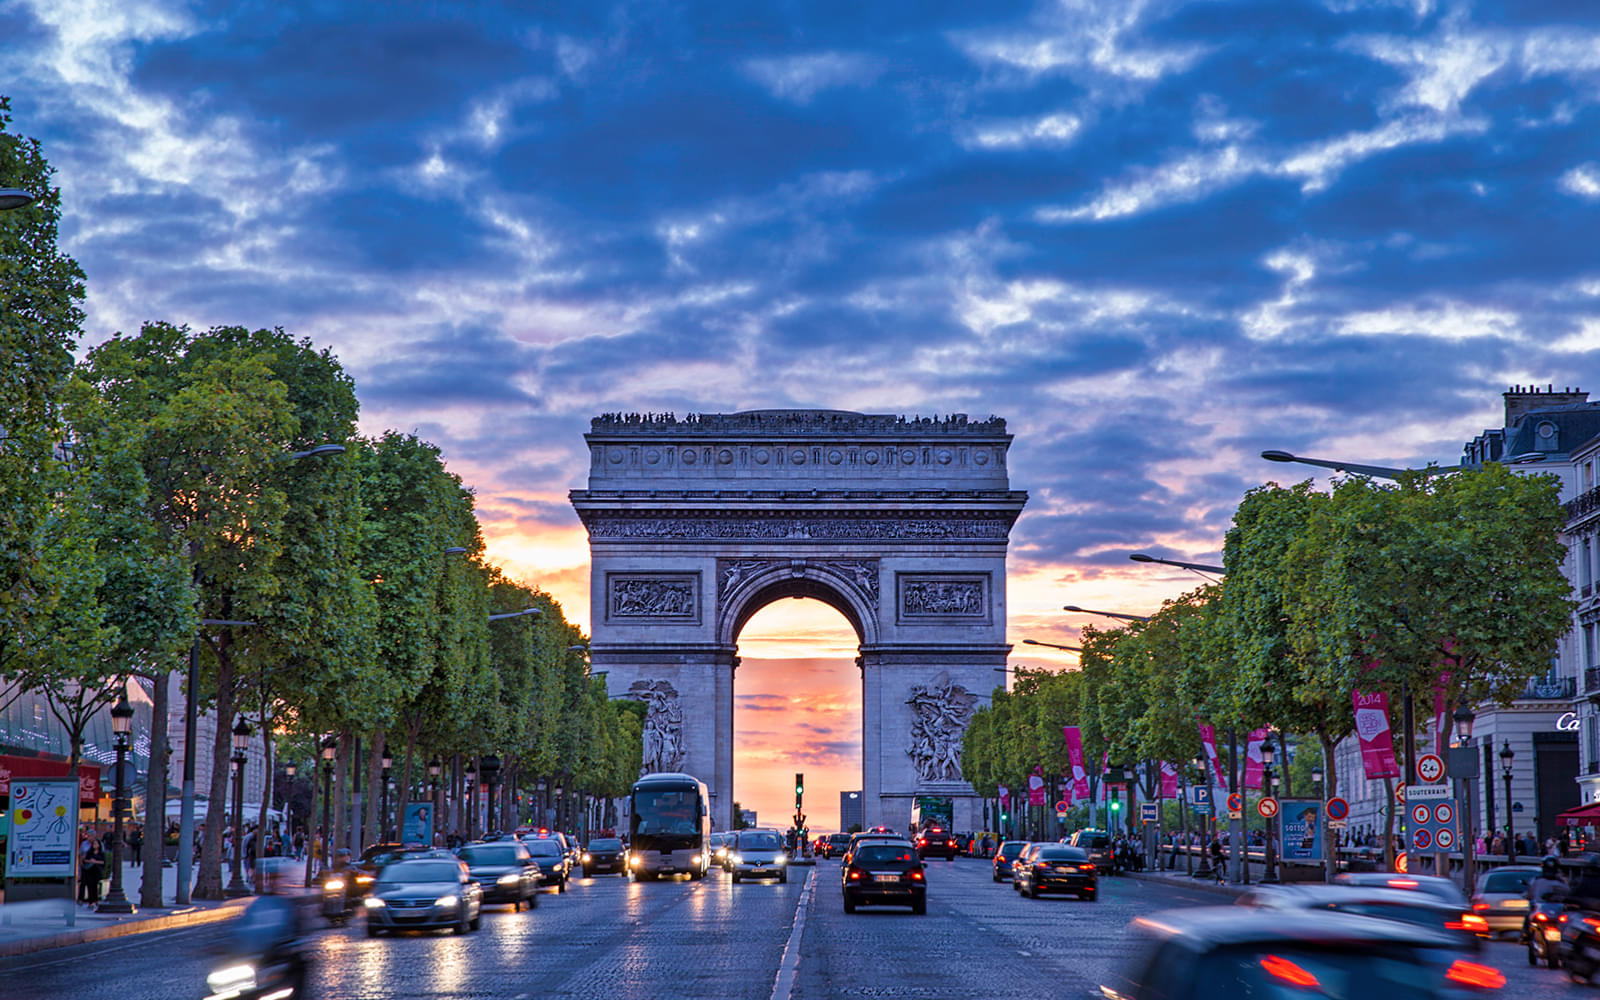 Admire the grandeur of the Arc de Triomphe, standing tall as a symbol of triumph